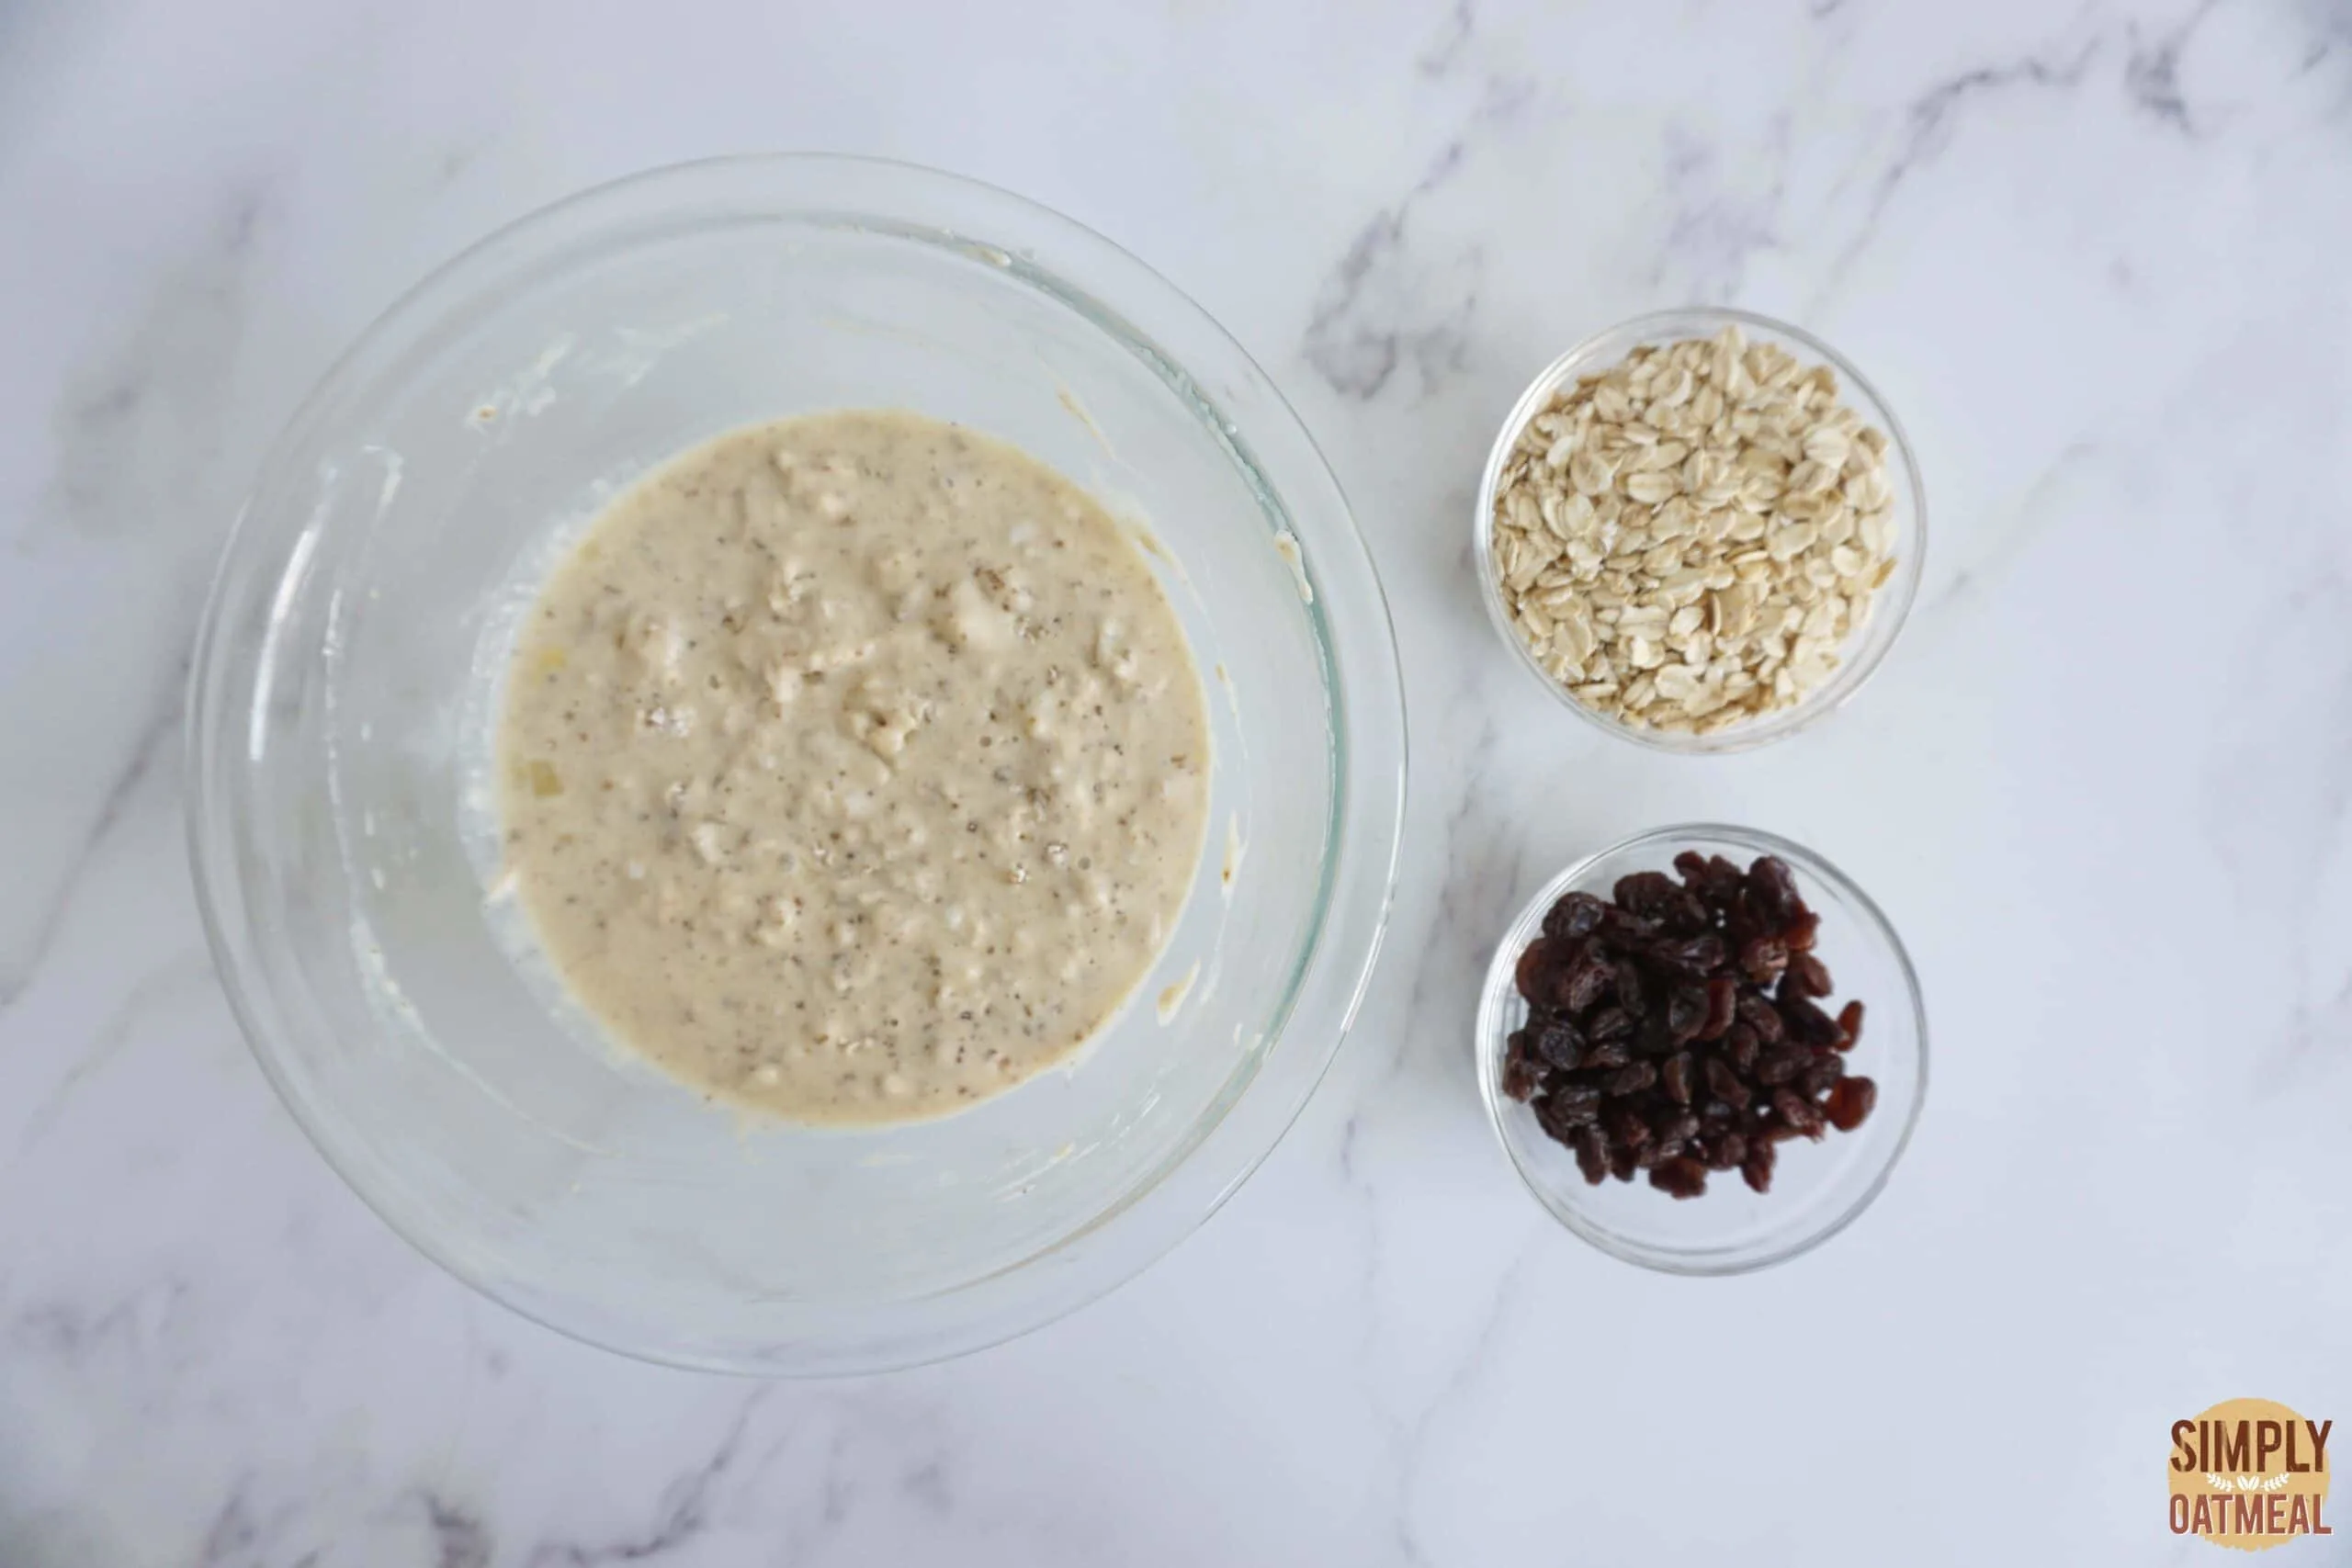 Wet and dry ingredients to make cinnamon streusel oatmeal muffins